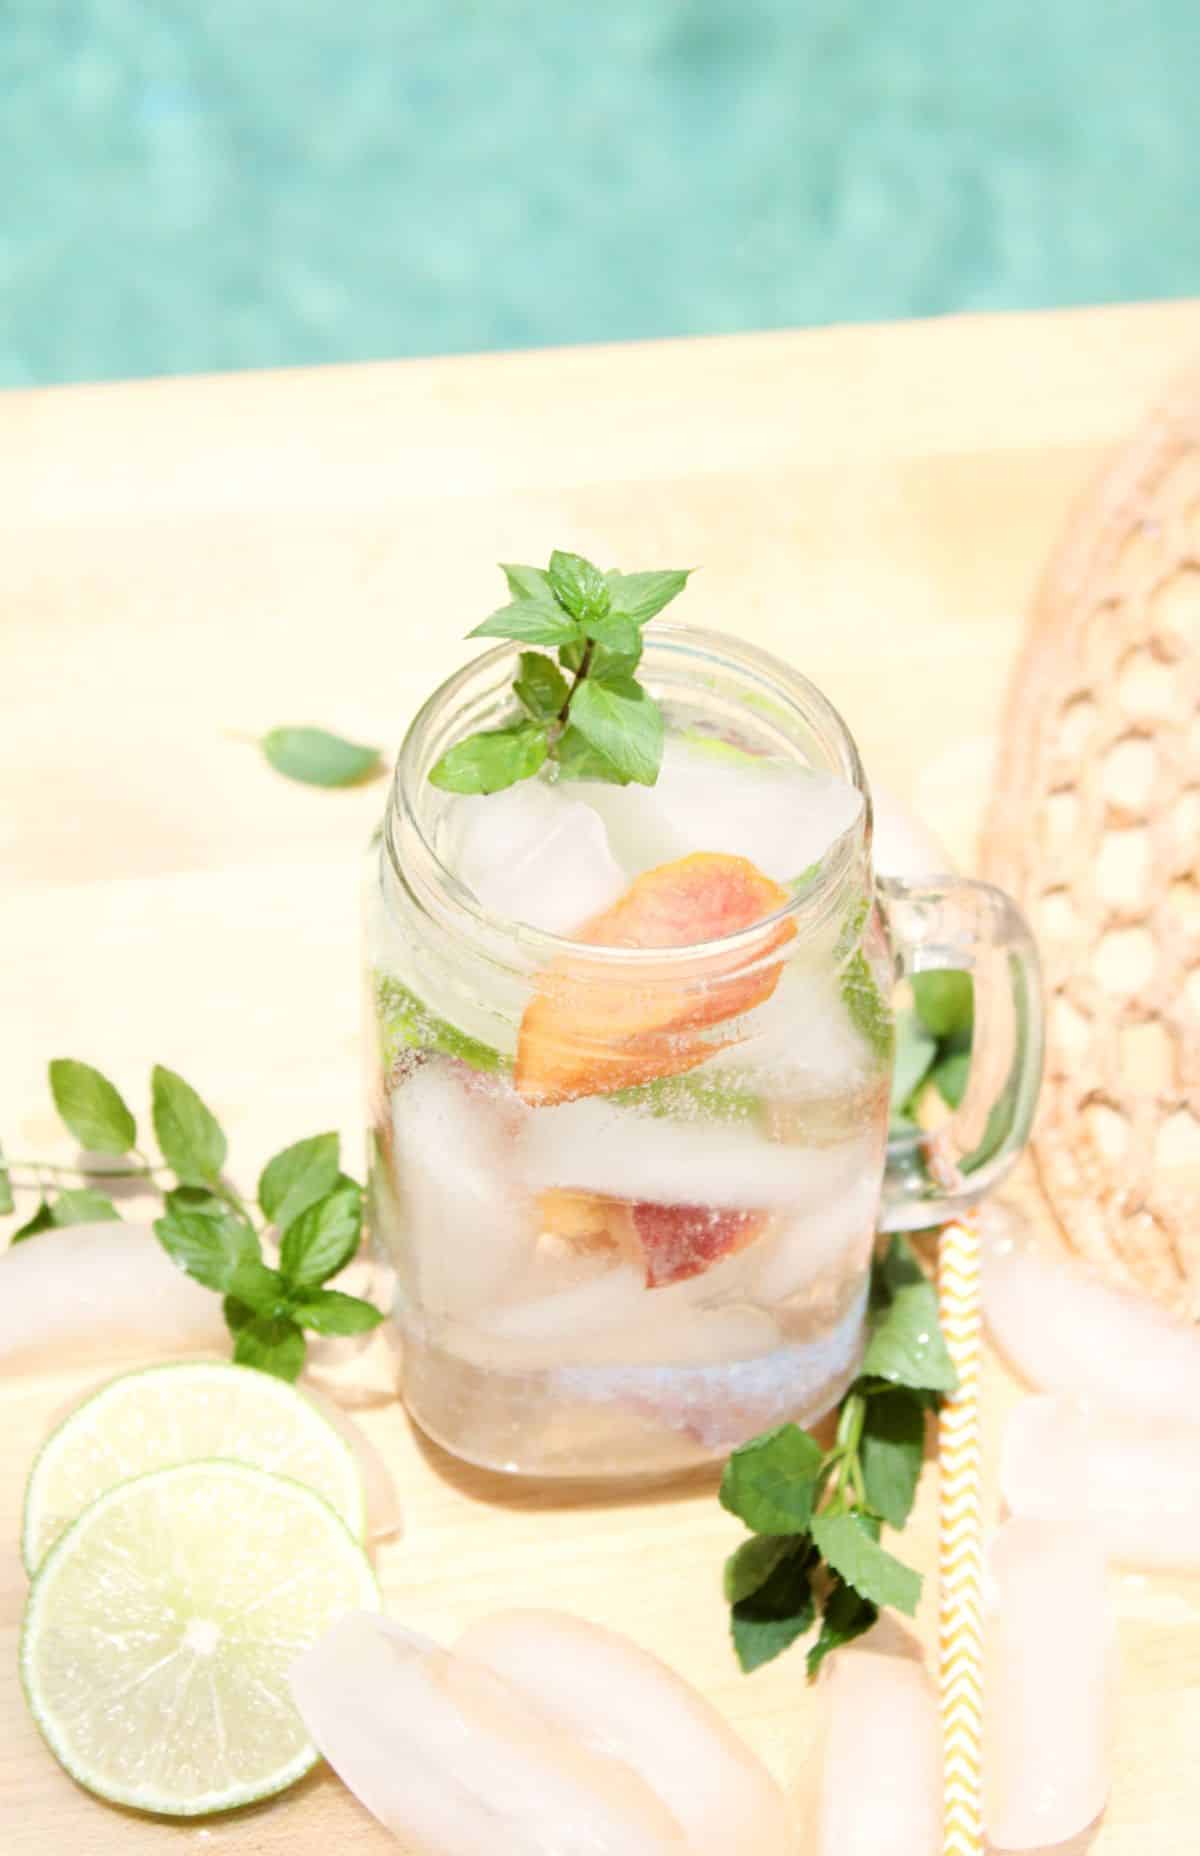 Peach Mojitos in a glass jar garnished with mint leaves.